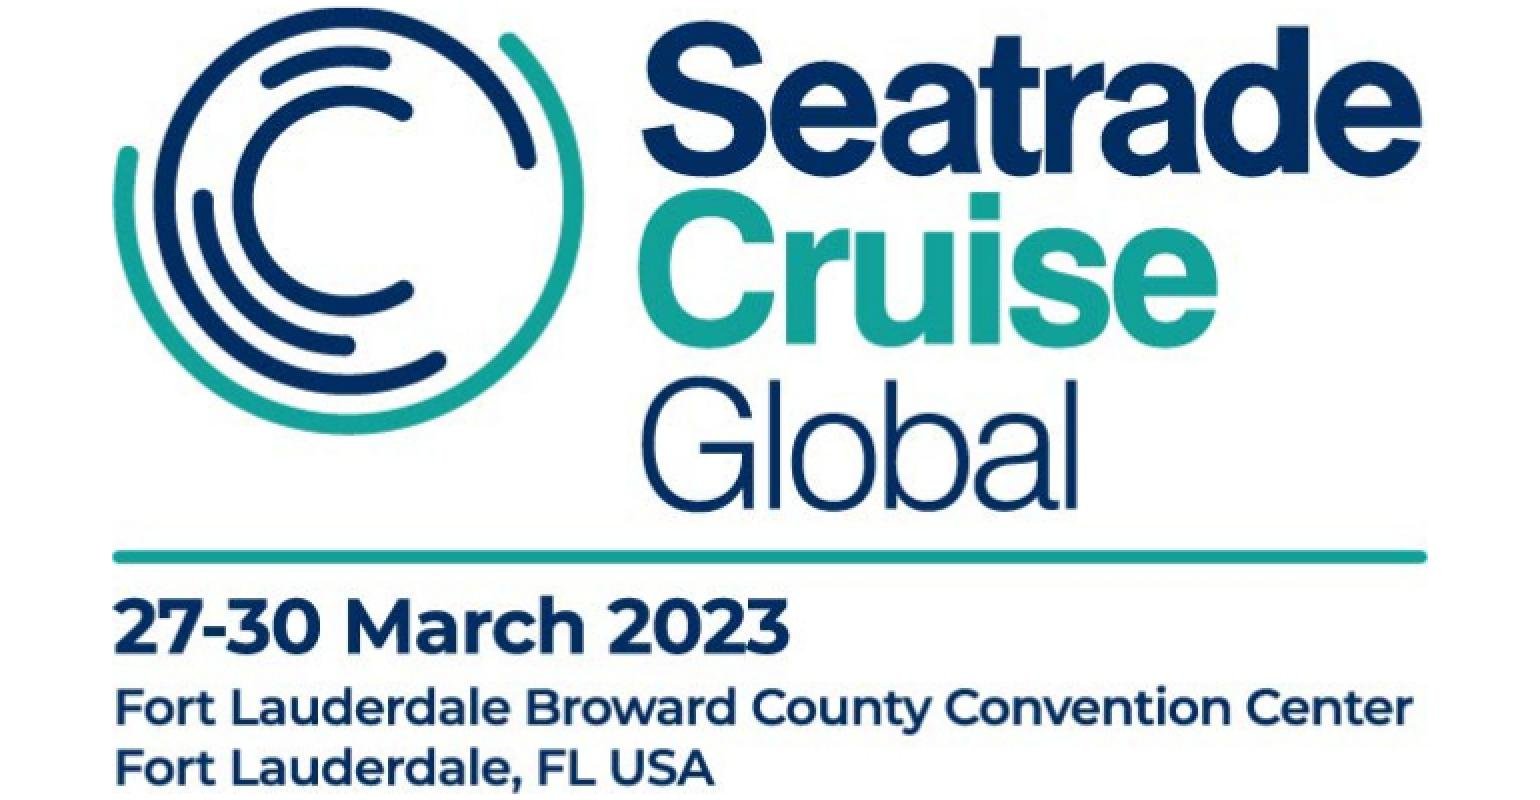 Seatrade Cruise Global is coming to Fort Lauderdale in 2023